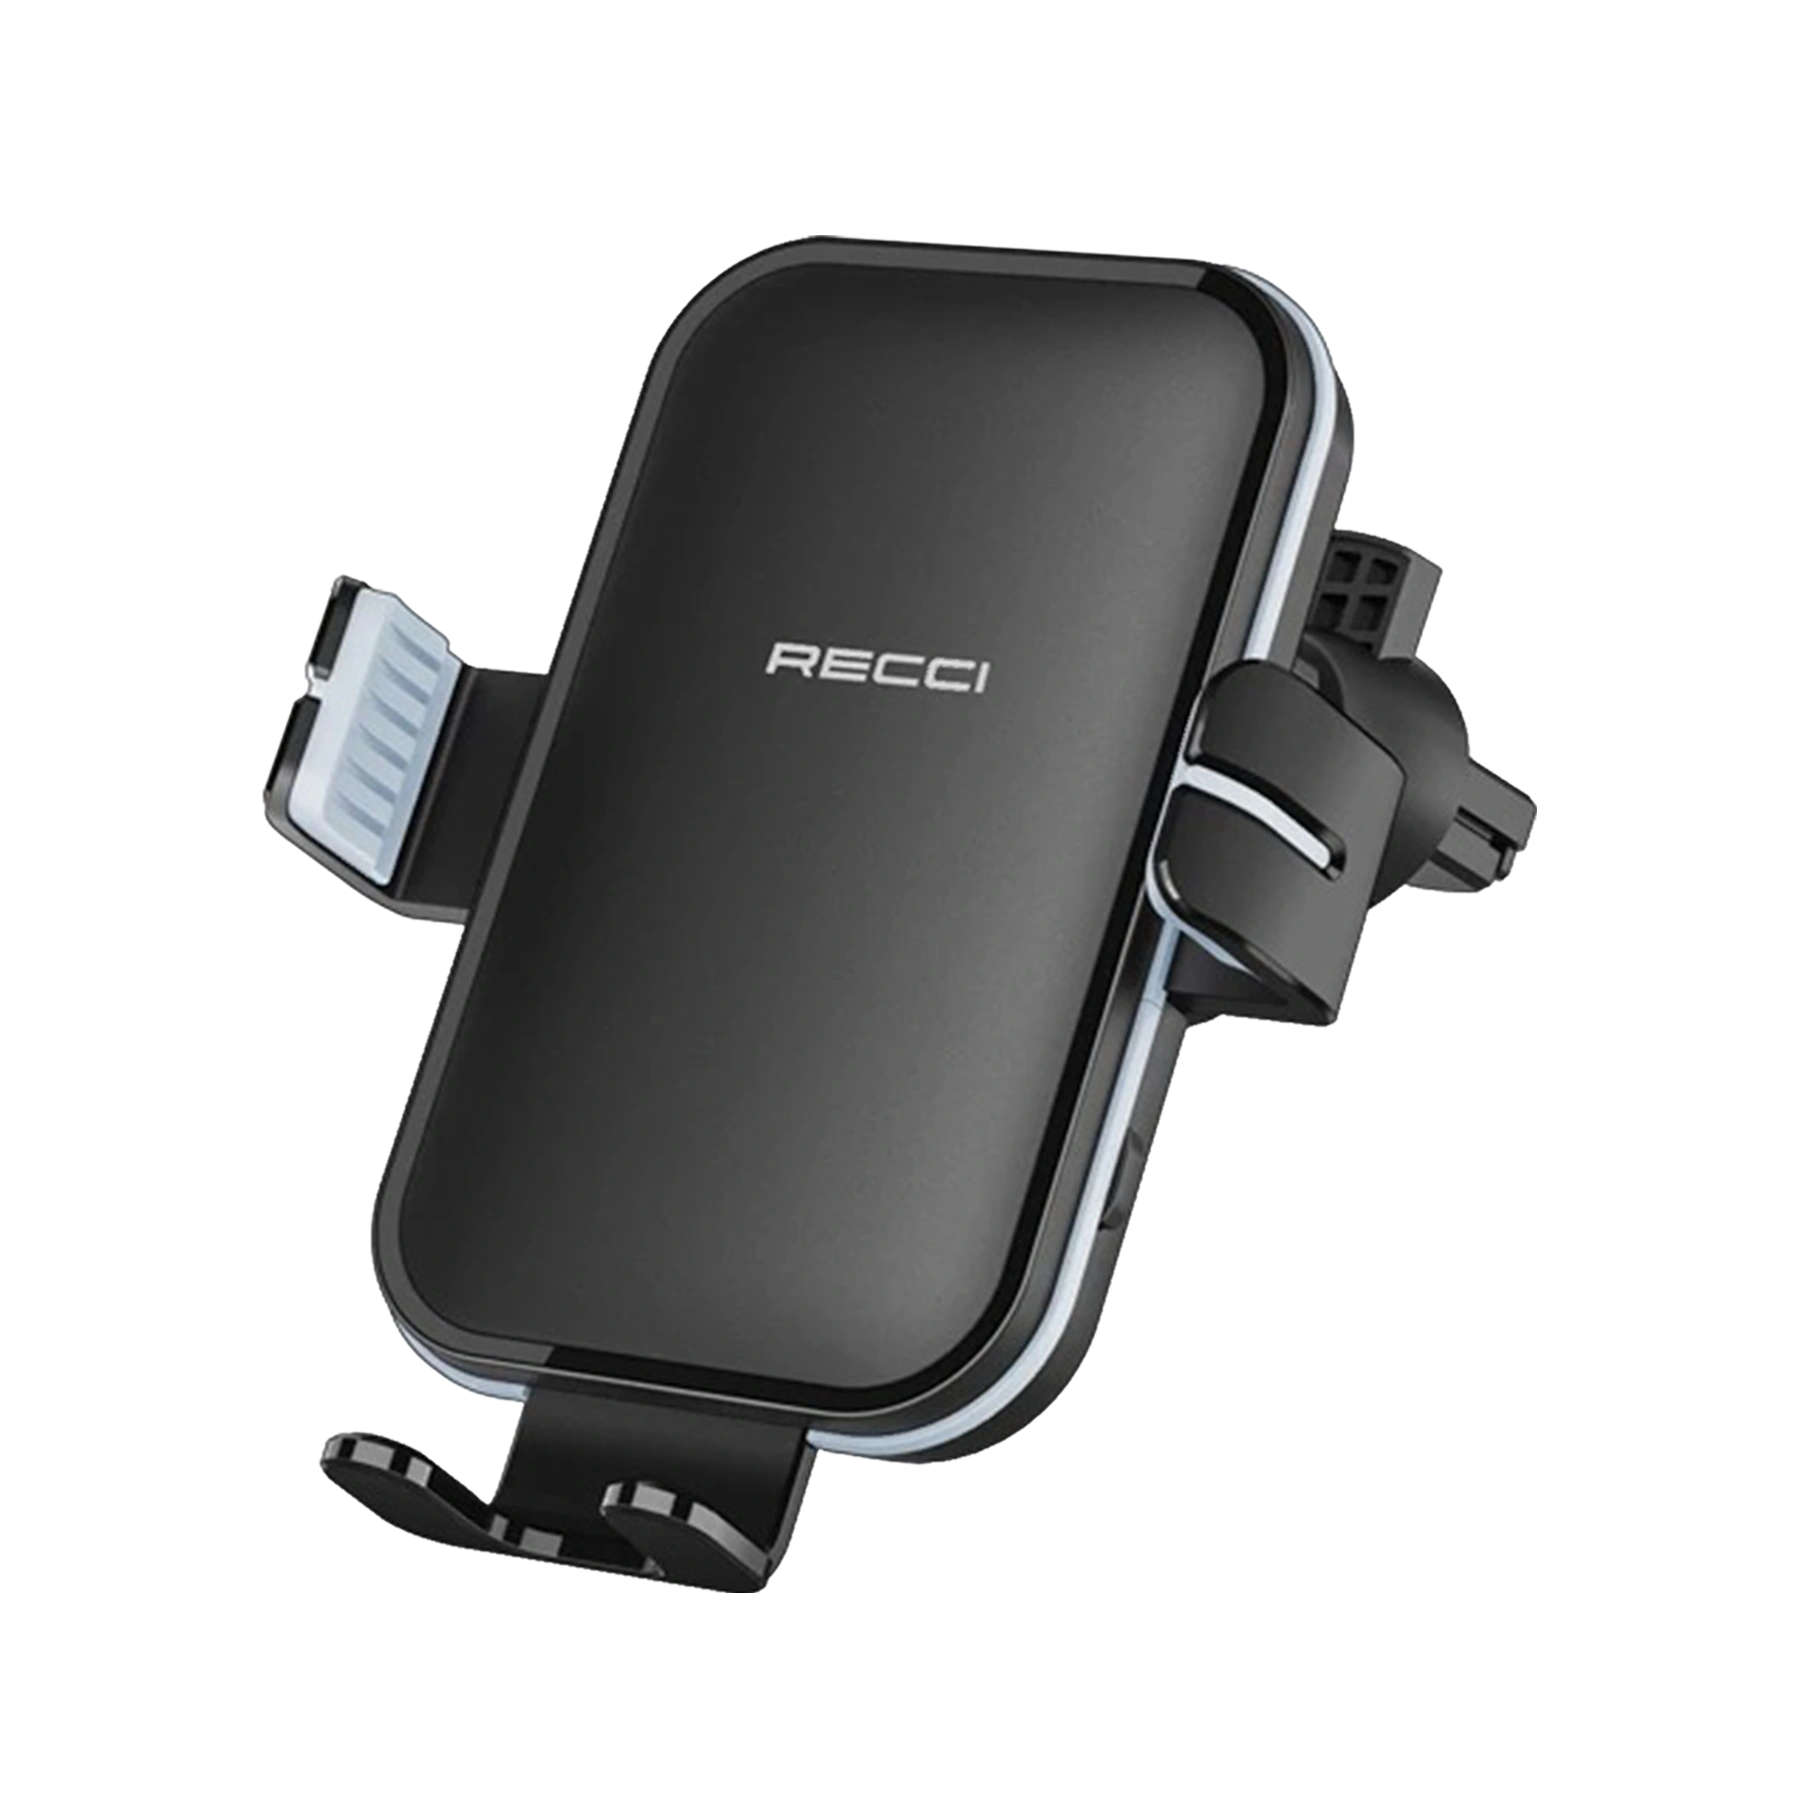 Recci Richway Wireless Charger Car Holder RHO-C13